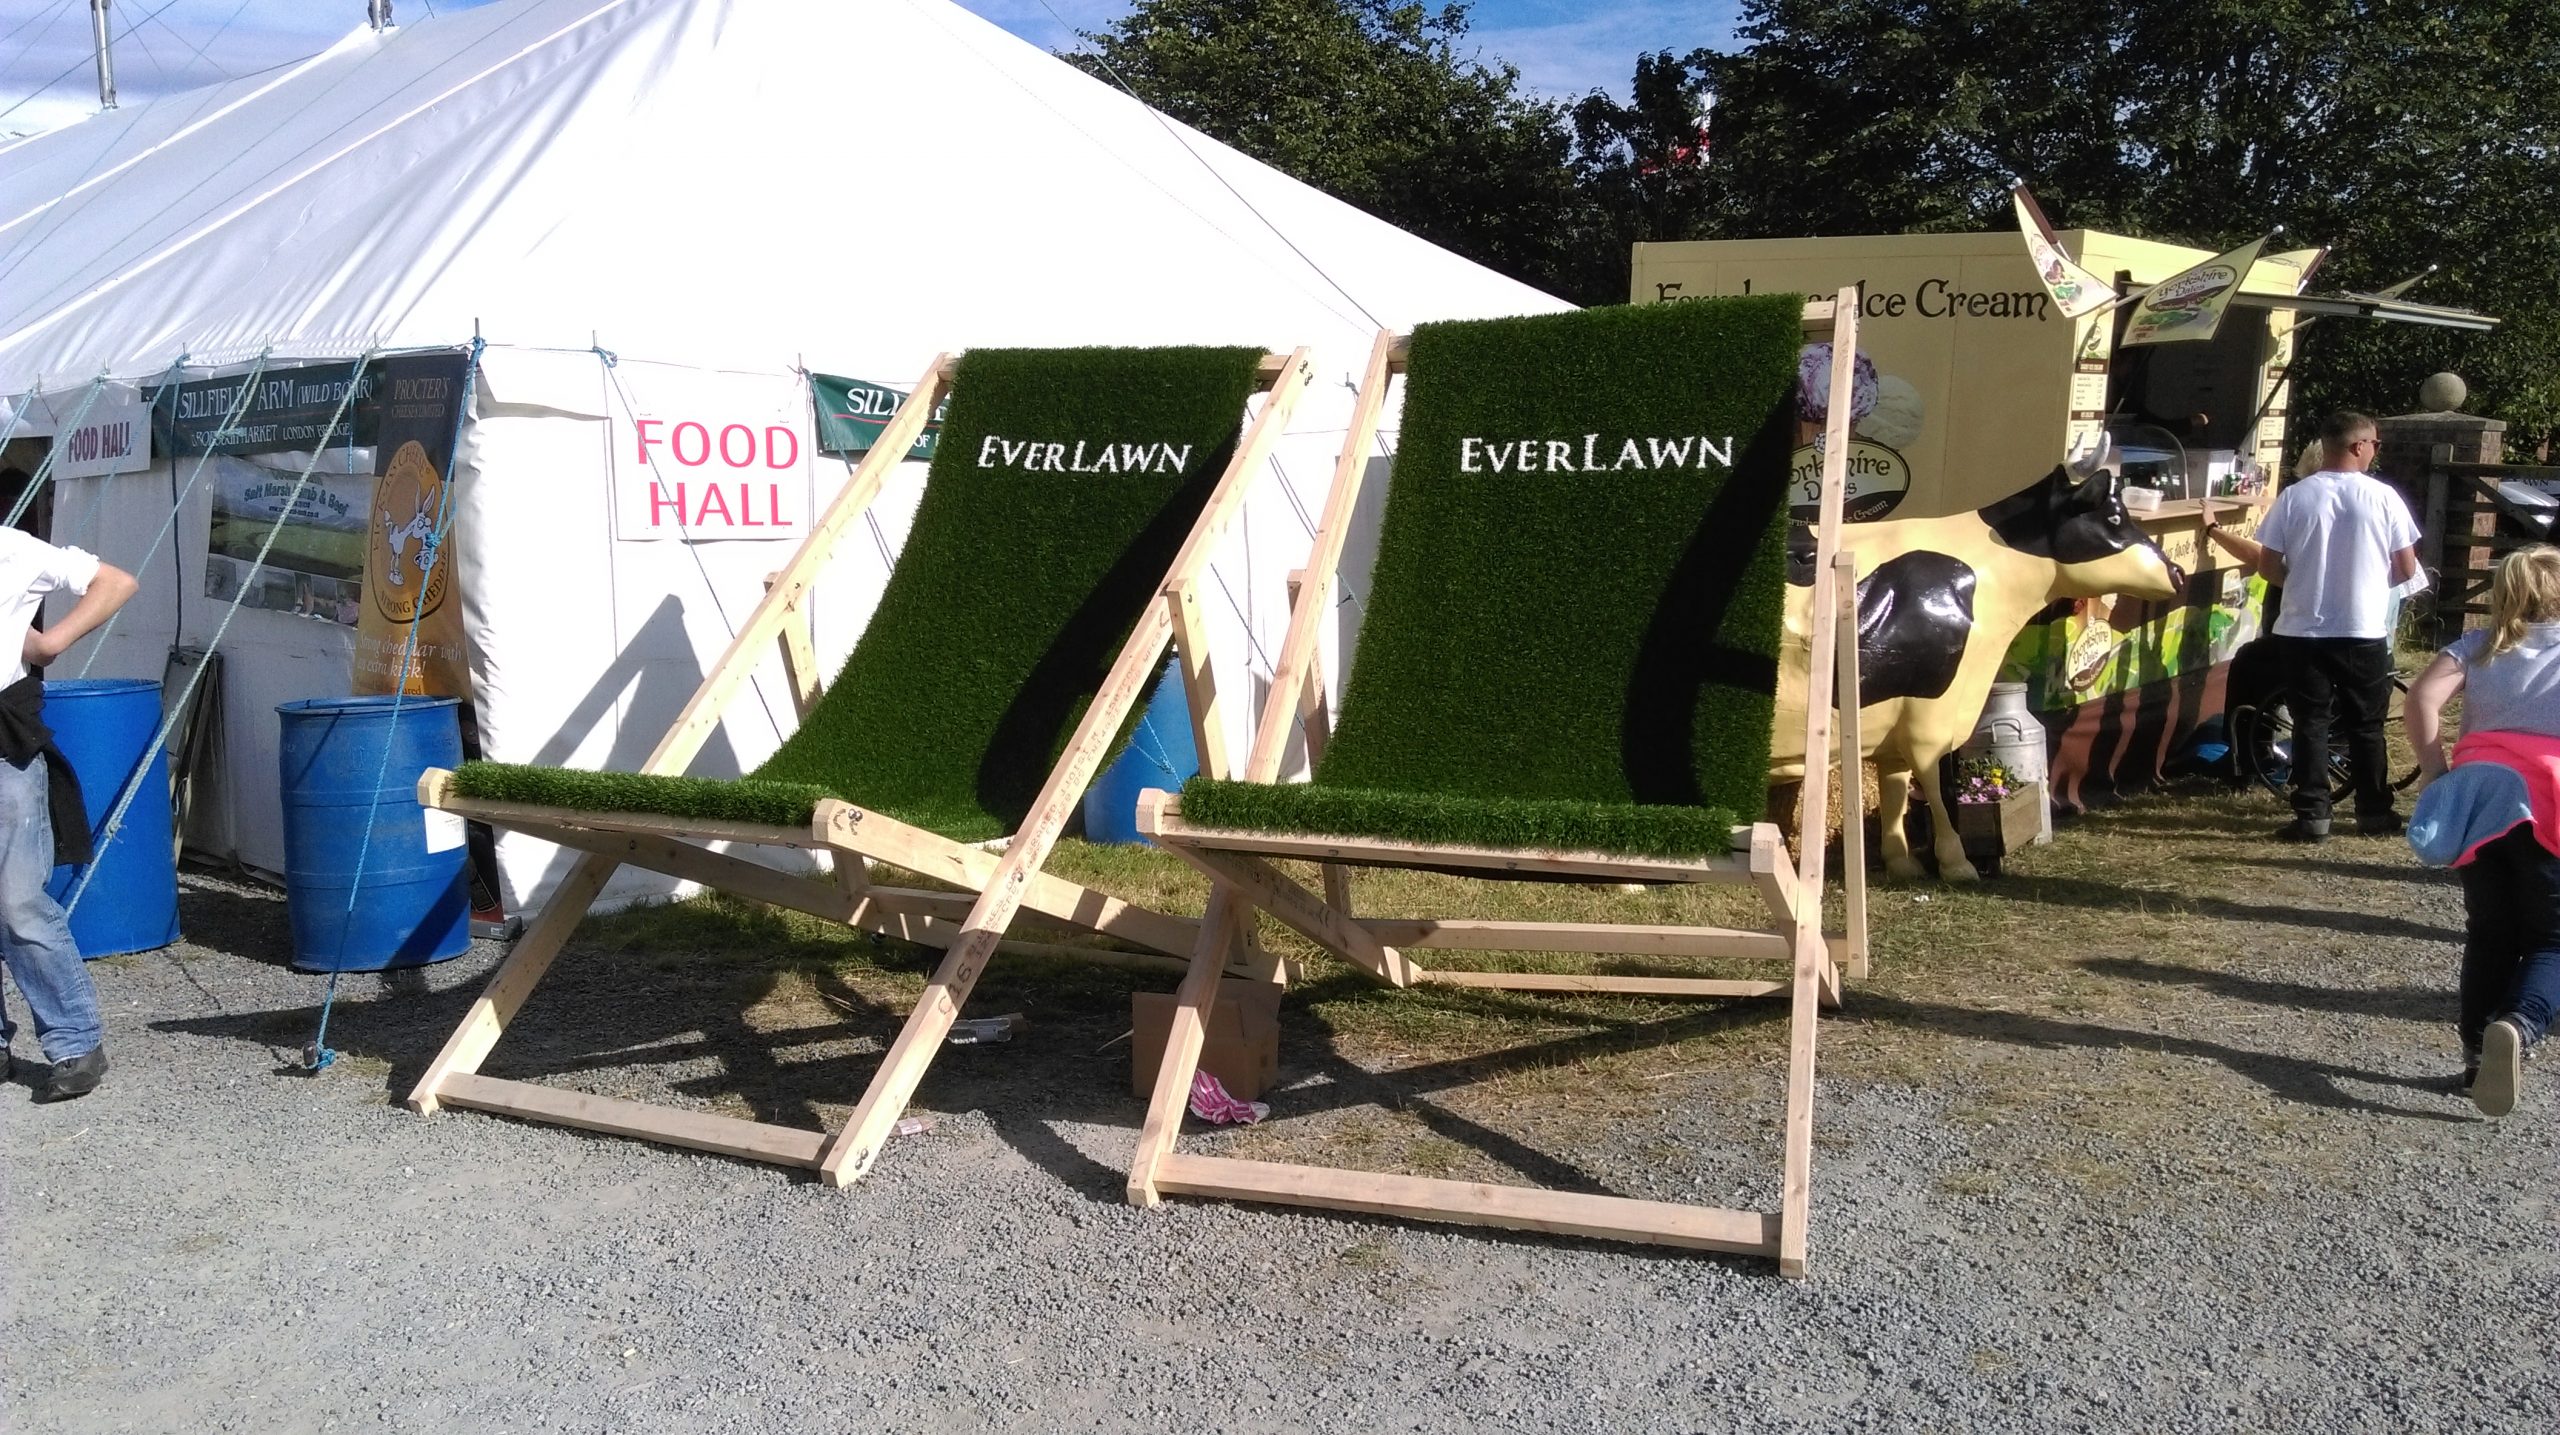 Our Giant Artificial Grass Deckchairs proved a huge success!